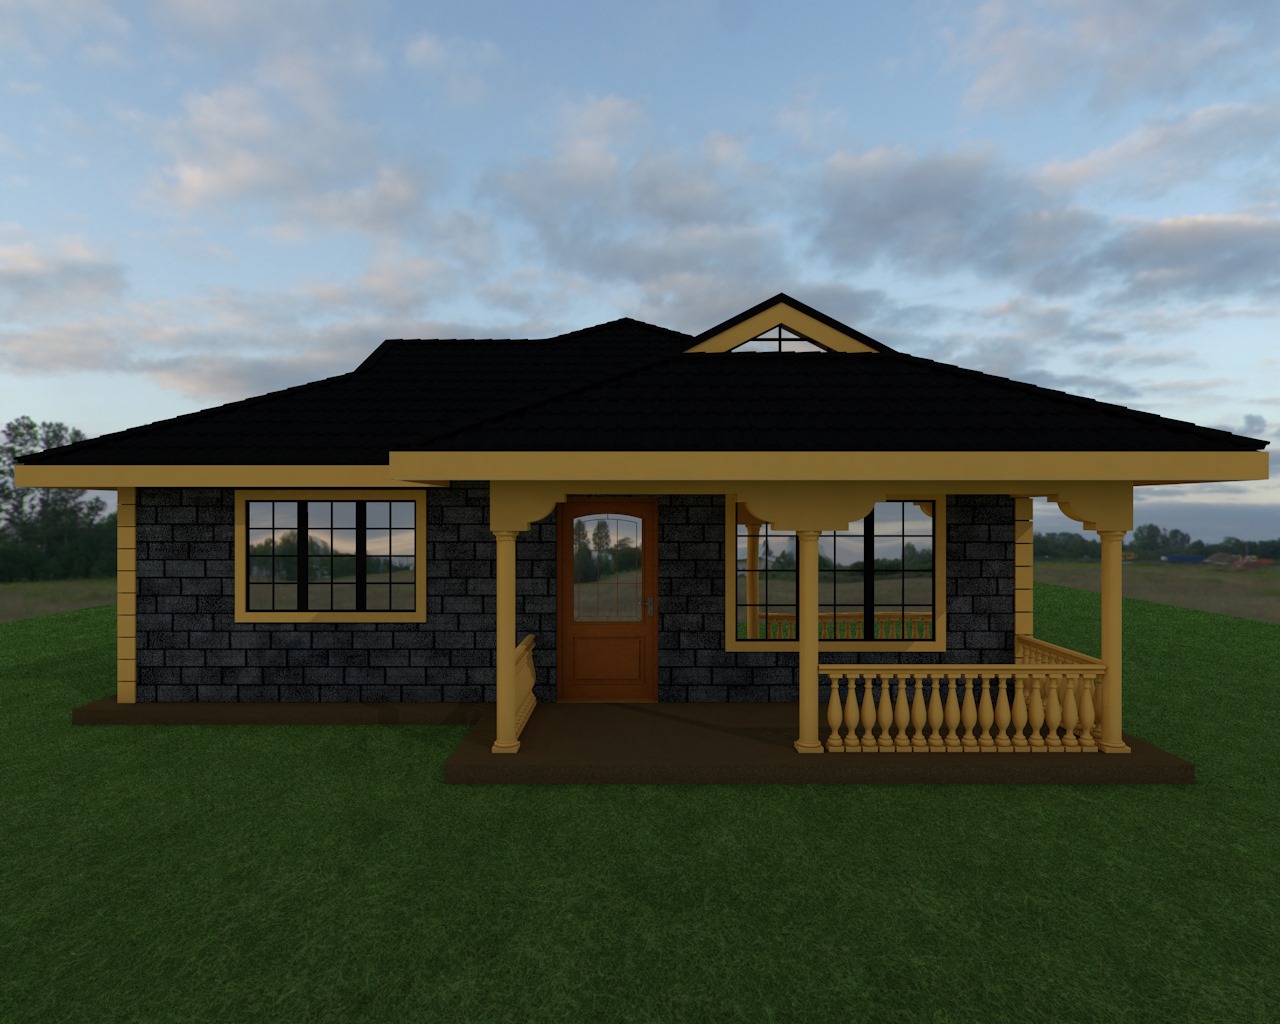 Two Bedroom Bungalow House Plan